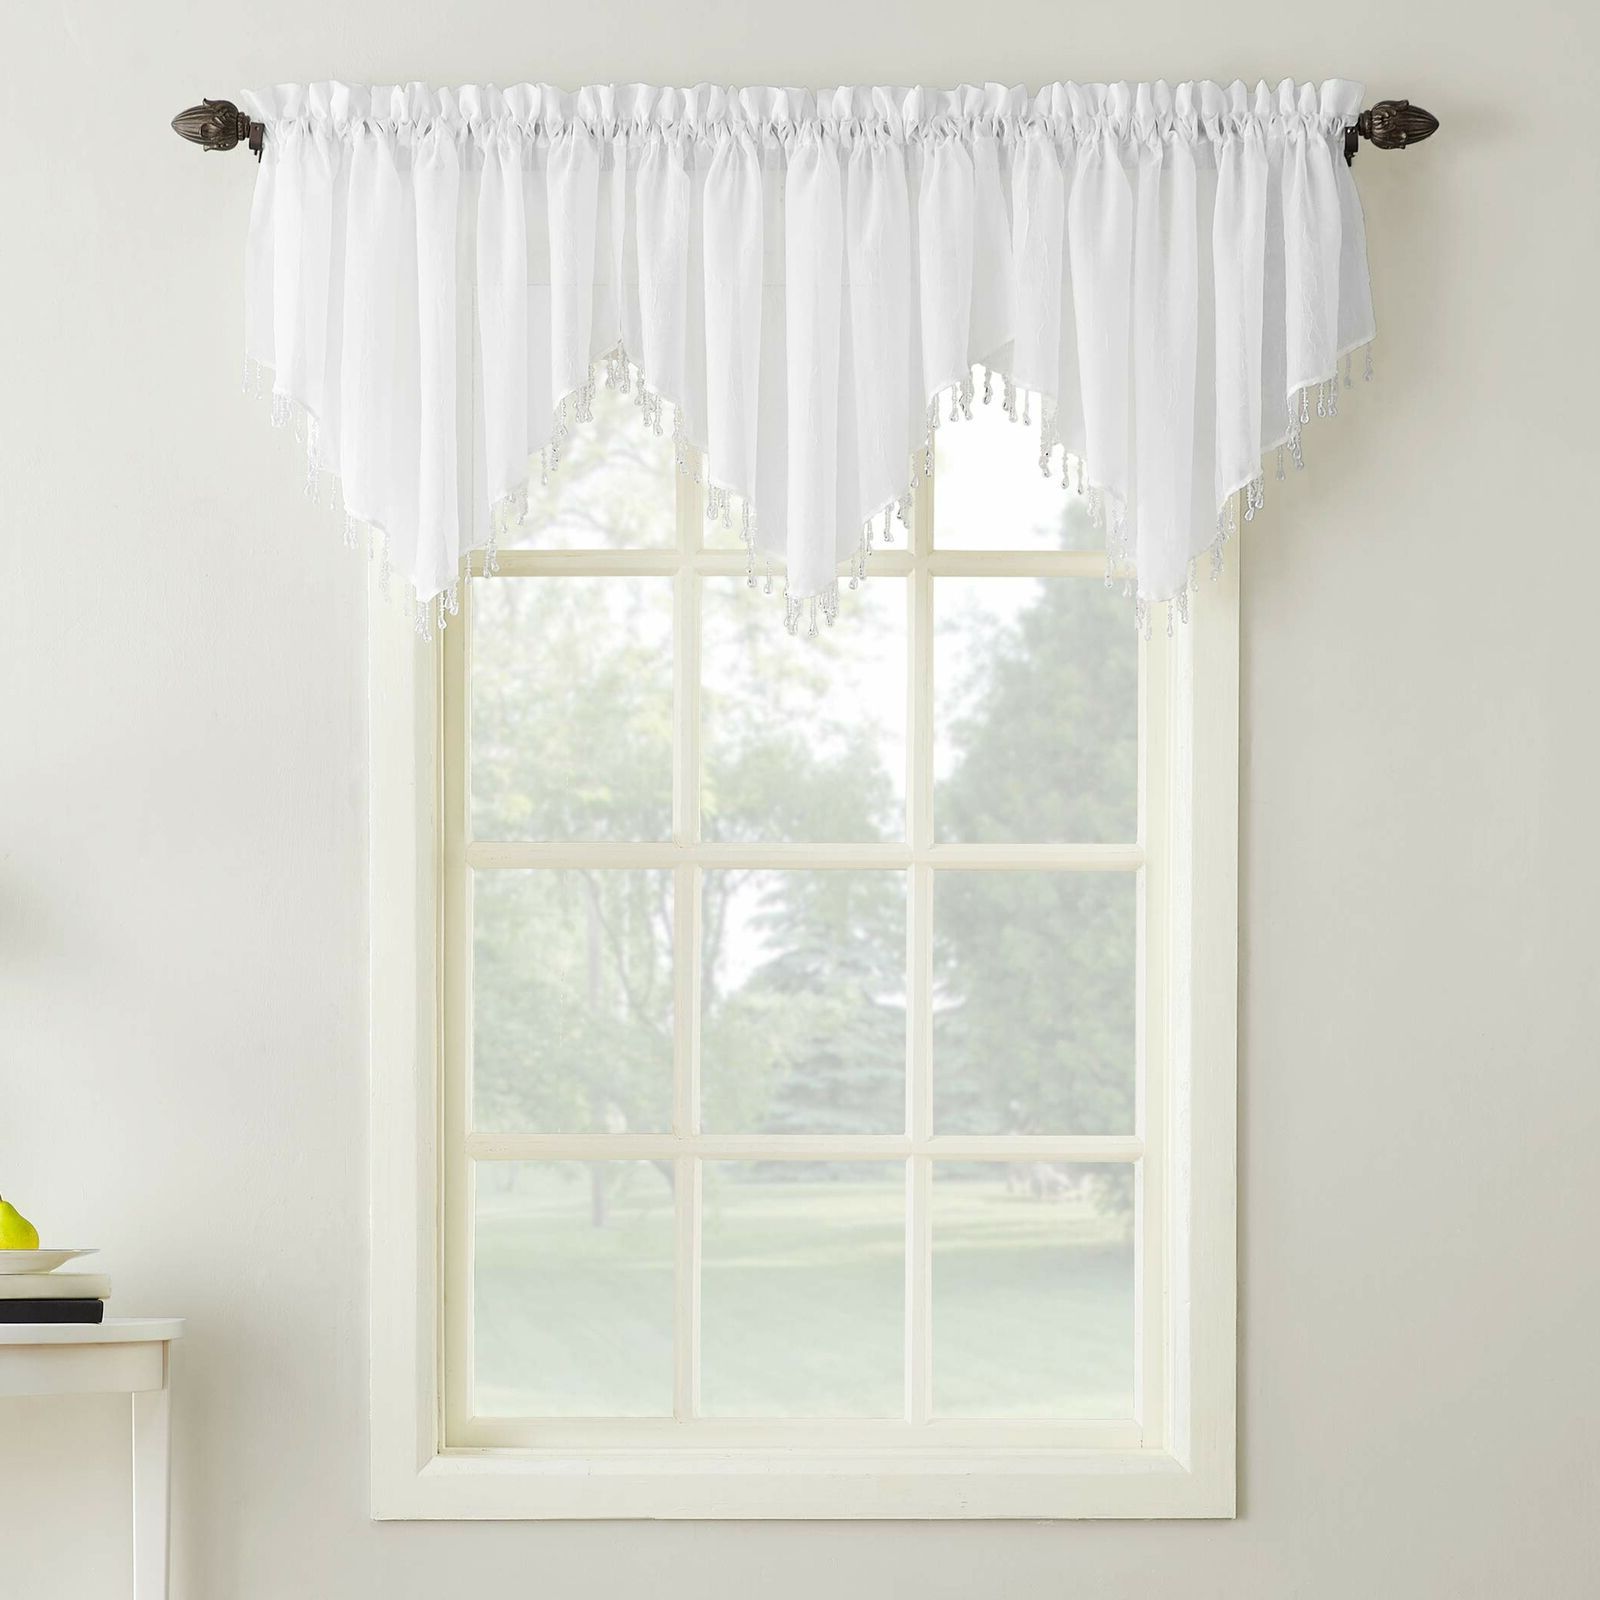 Erica Crushed Sheer Voile Grommet Curtain Panels With Regard To Famous Erica Crushed Sheer Voile Ascot Beaded Curtain Valance 51 X 24 White (View 15 of 20)